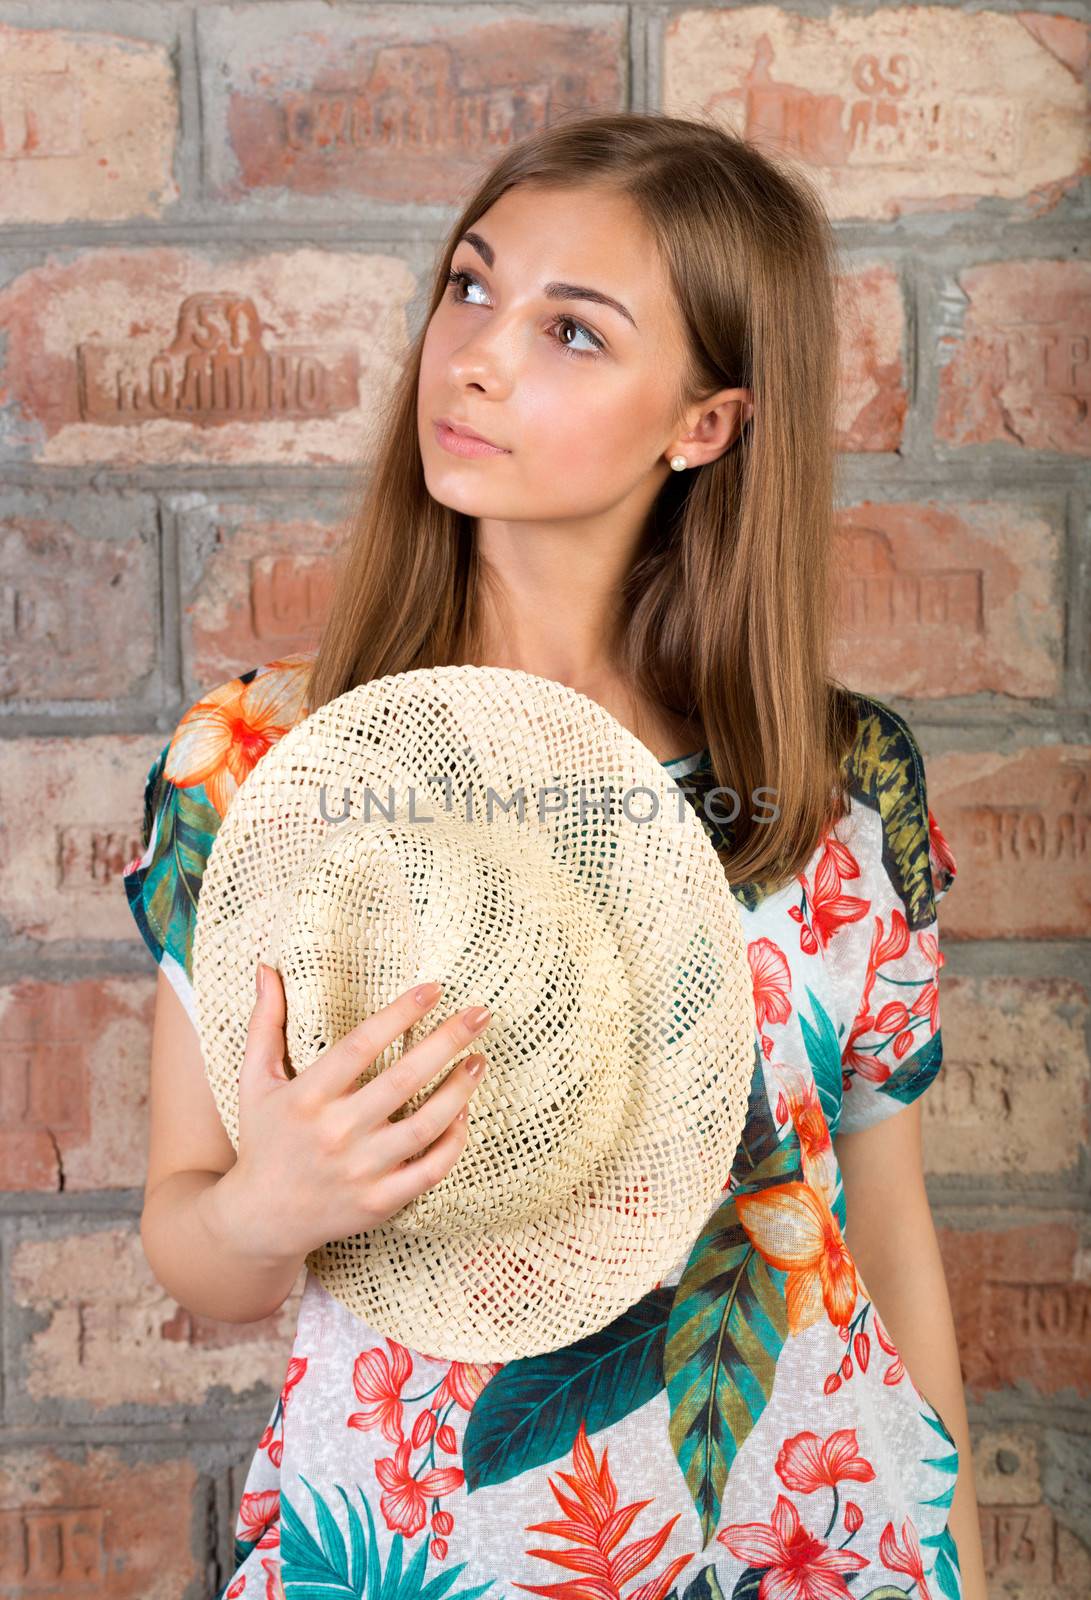 Portrait of pensive girl with a straw hat in hand against a vintage brick wall.